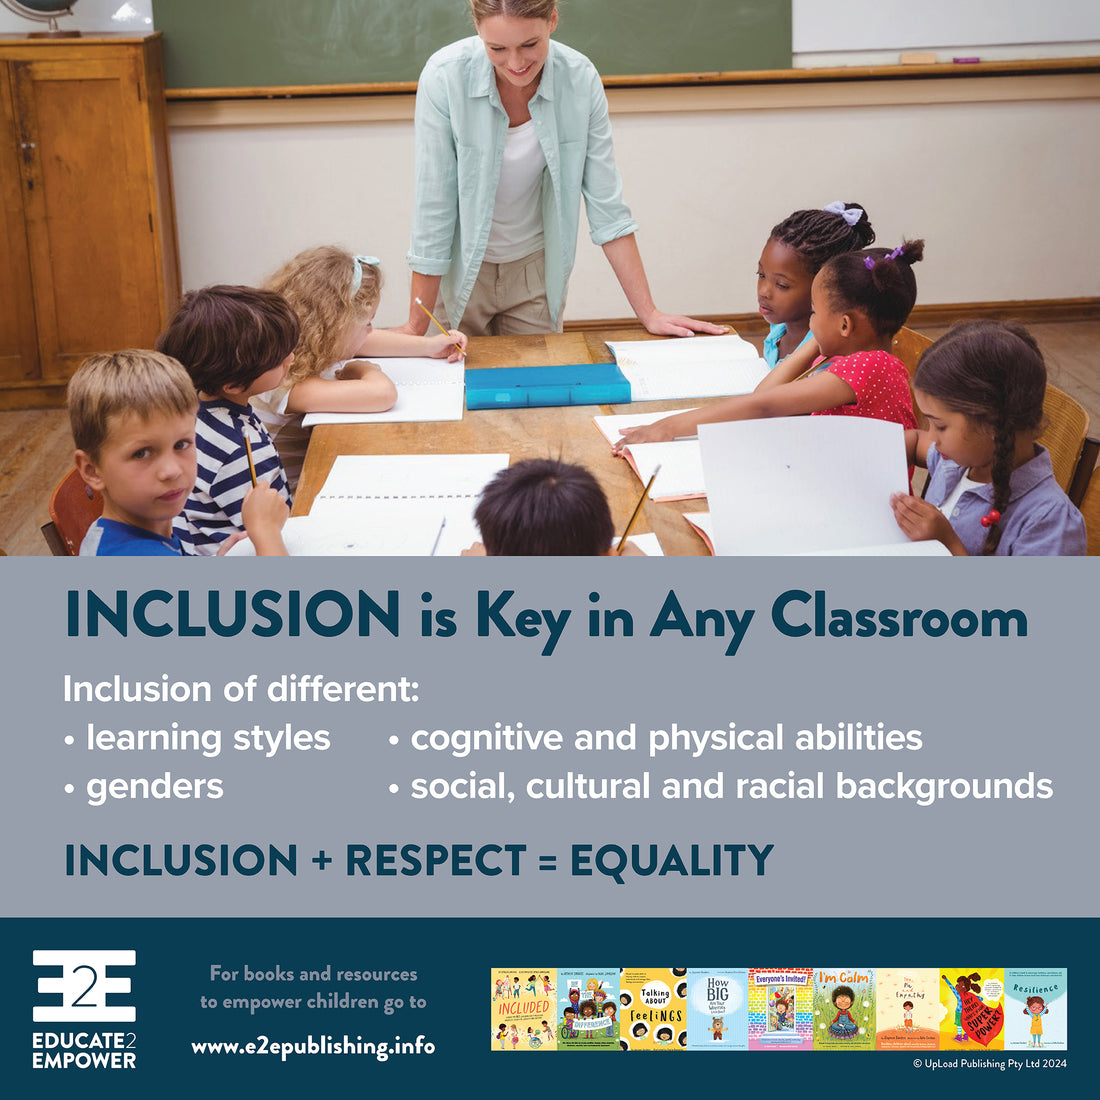 INCLUSION is Key in Any Classroom